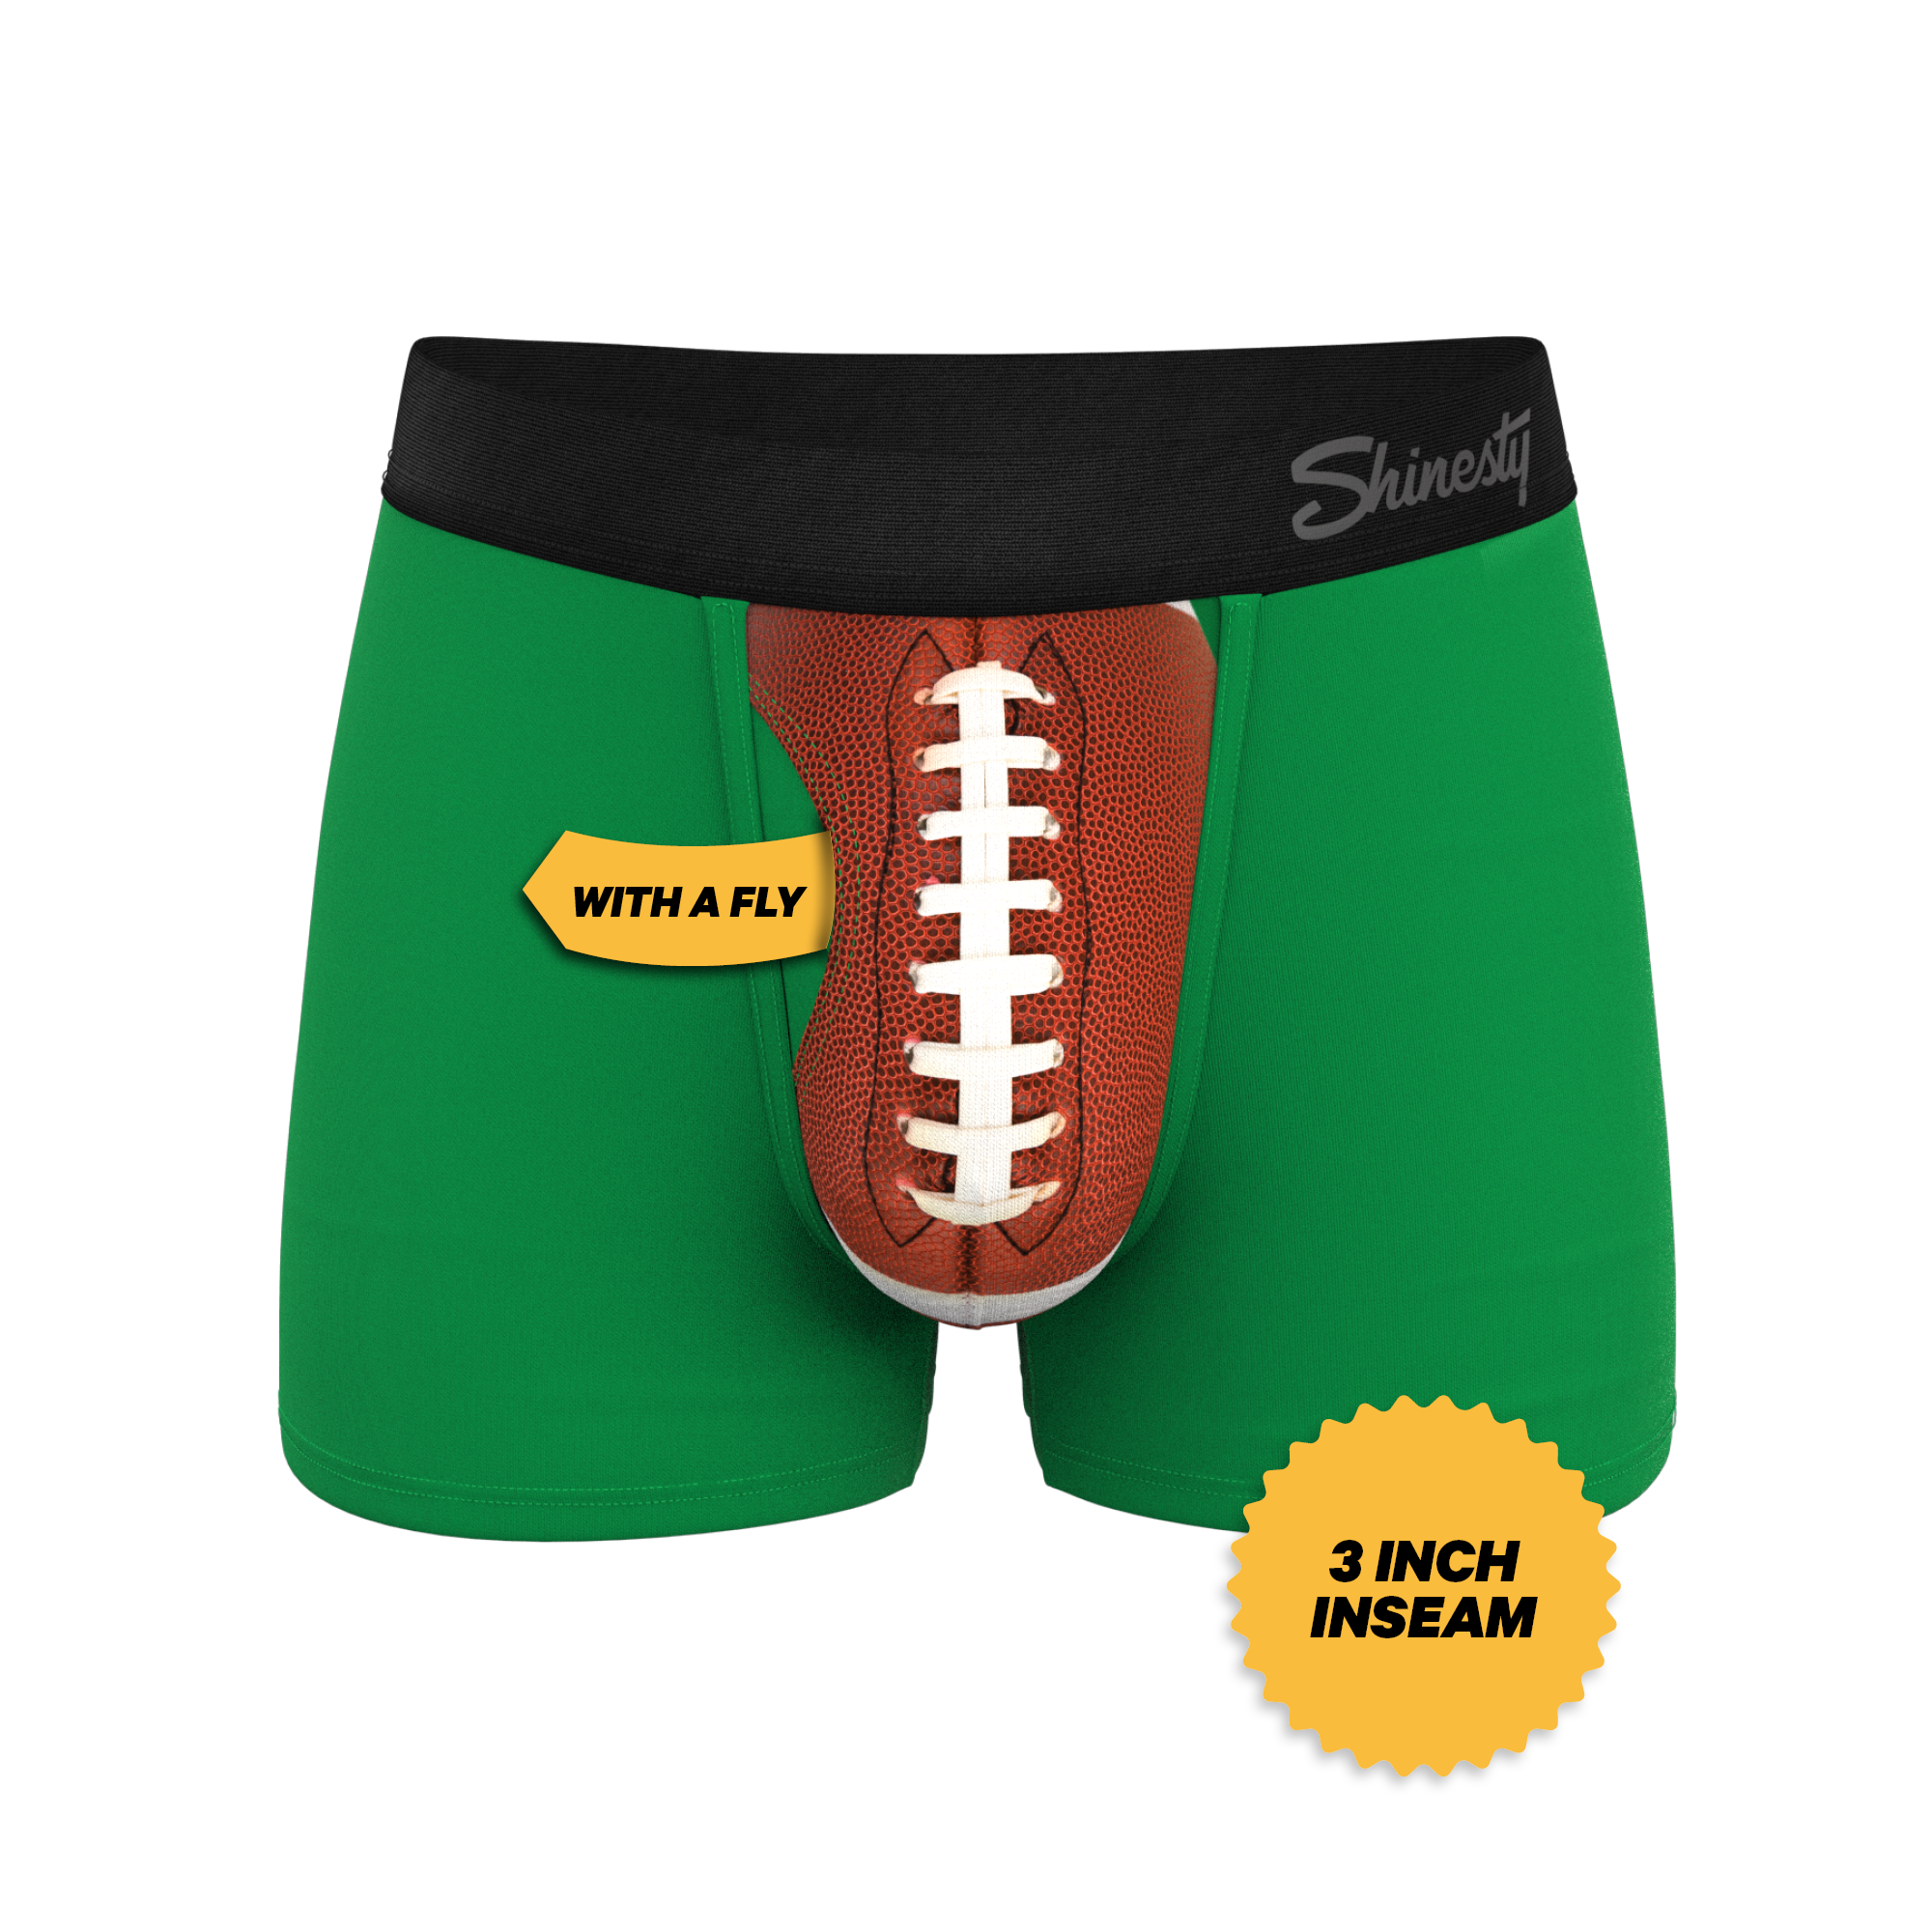 Shinesty - Ball Hammock Boxers. Because no one is wearing